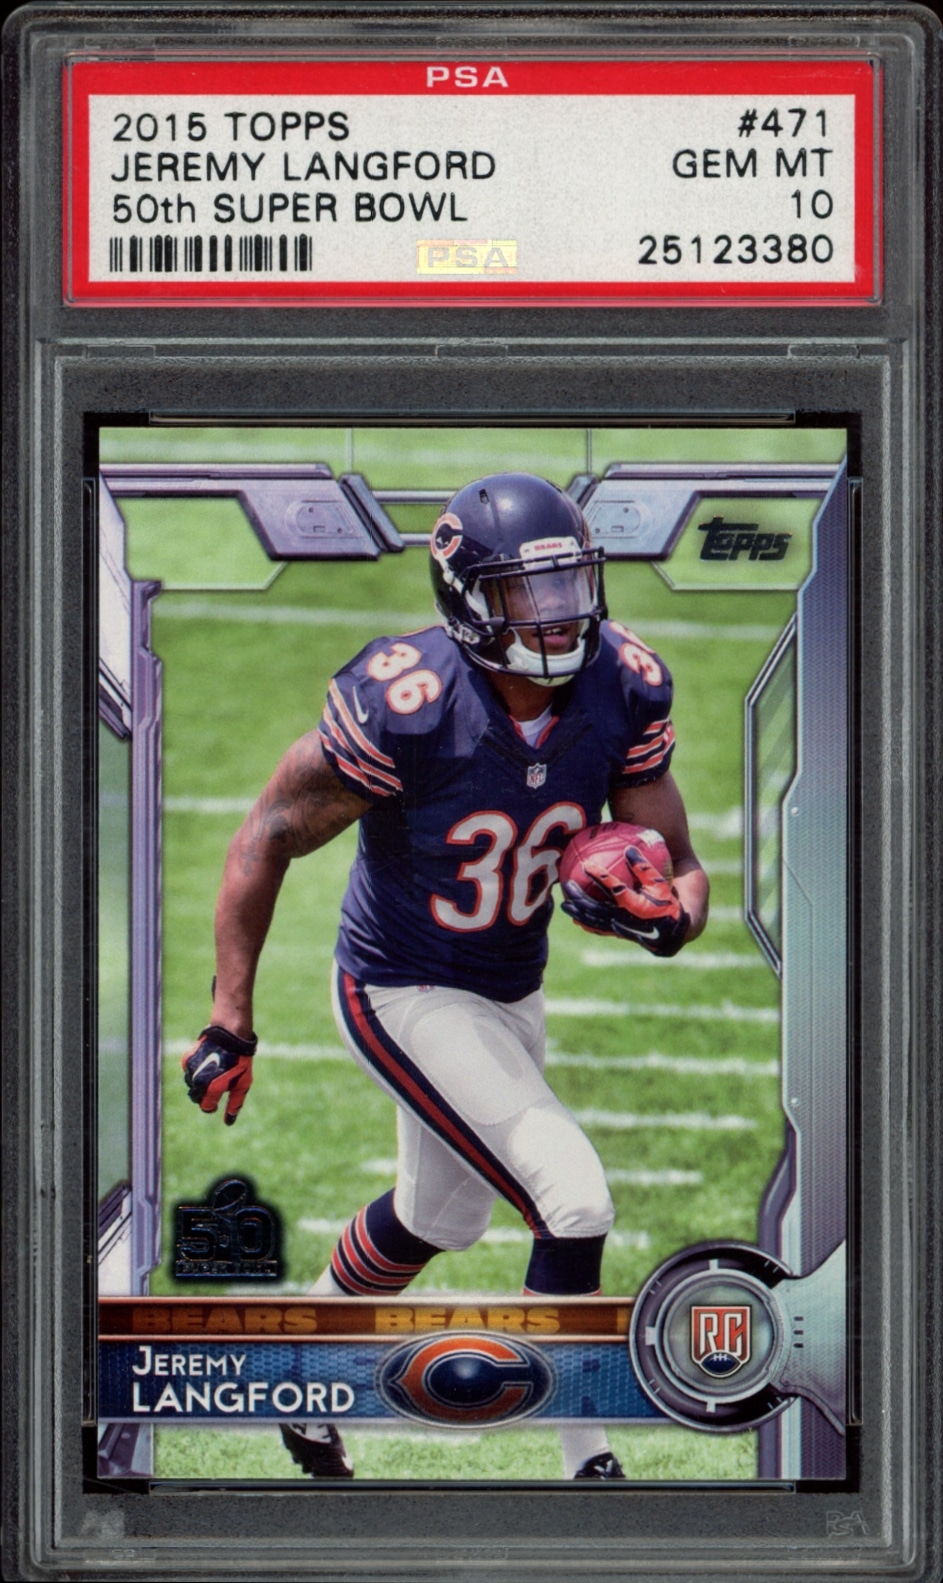 PSA 10 graded 2015 Topps Super Bowl 50 card featuring athlete Jeremy Langford in action.